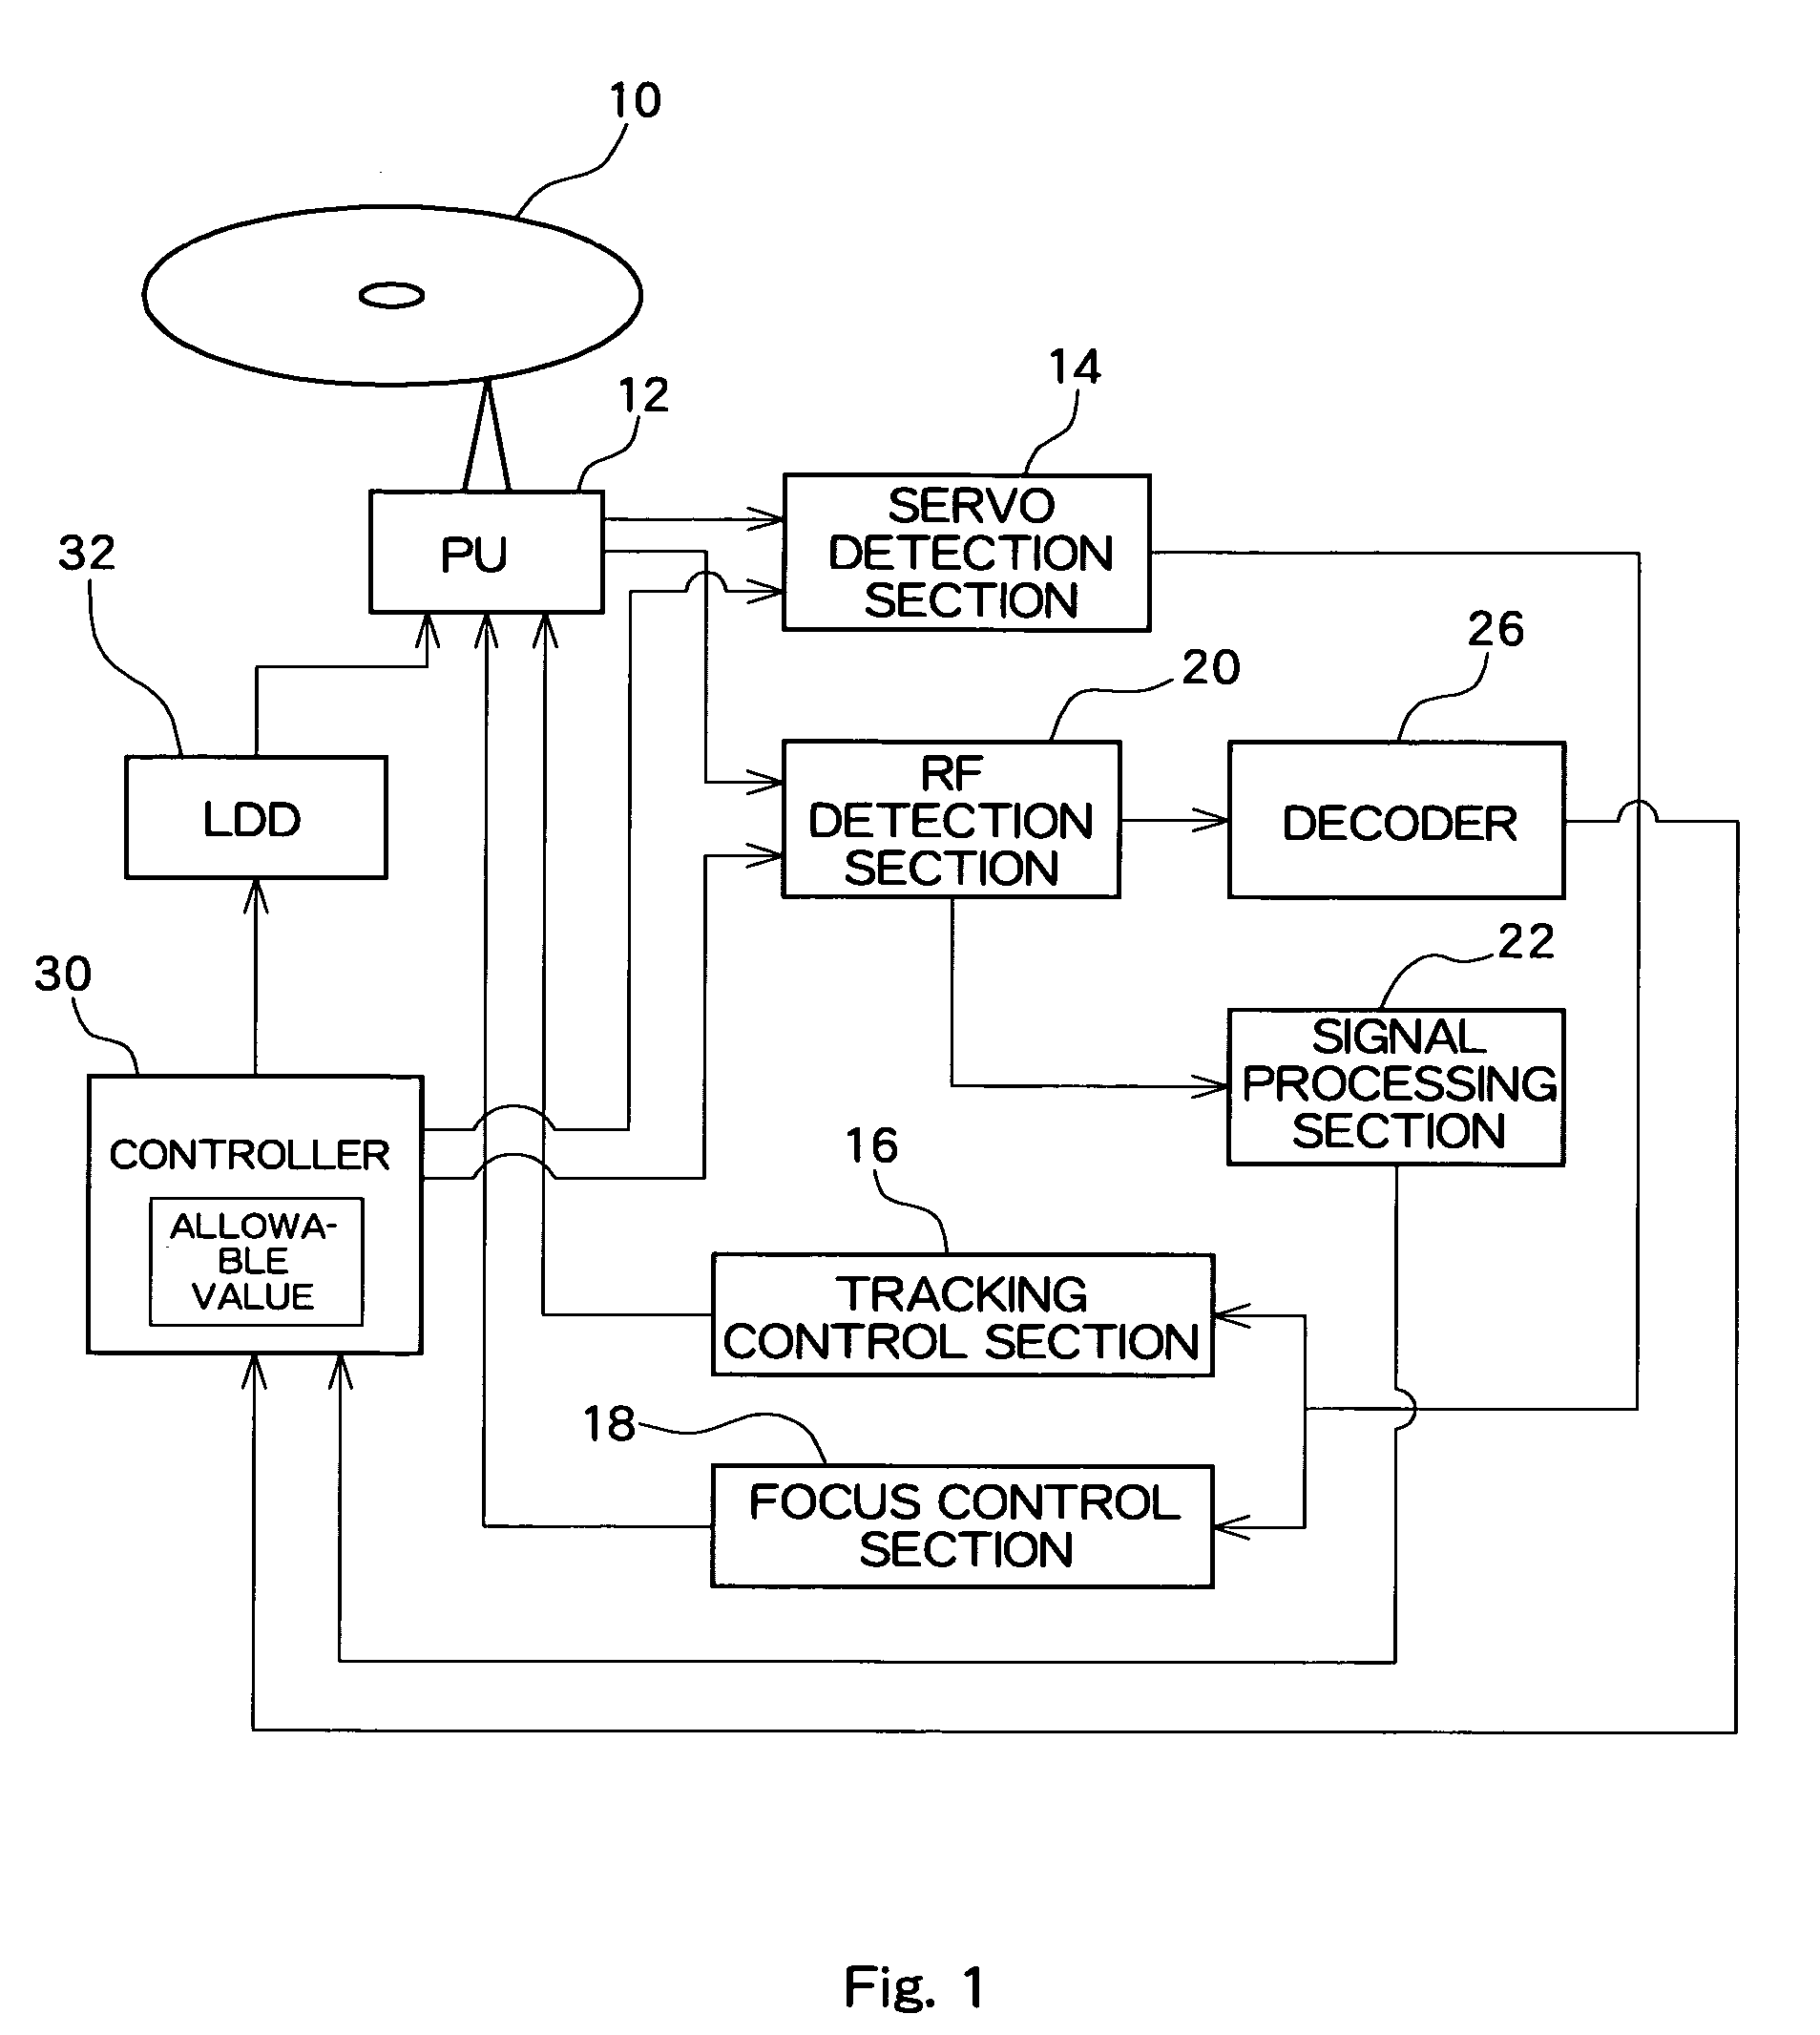 Optical disk apparatus for optimizing laser power during recording